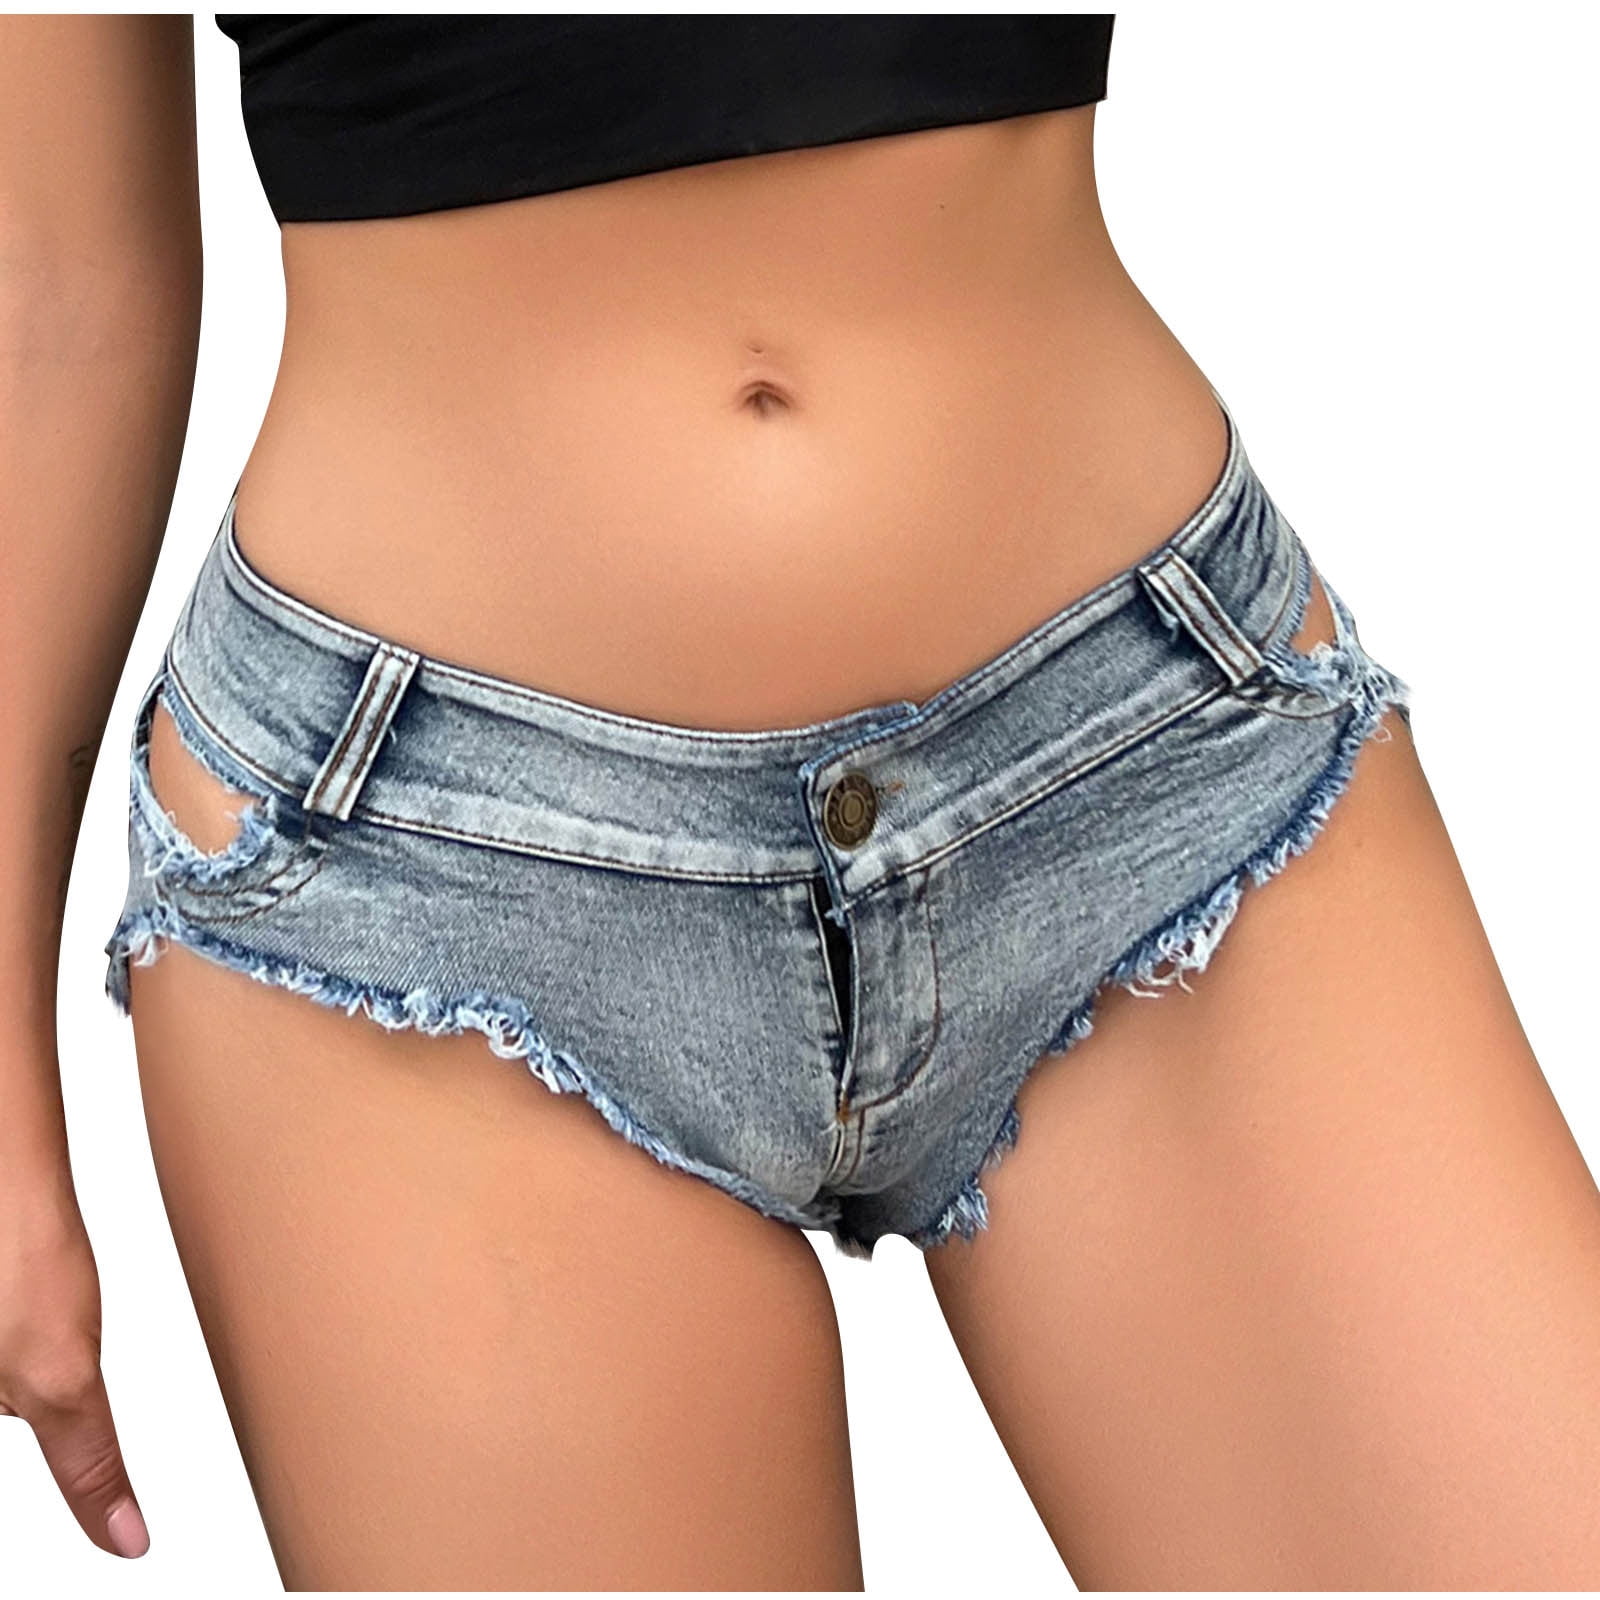 Jeans Shorts Women's Summer Panty Stretch Ripped Stretch Jeans Trousers  Mini Denim Hot Shorts Hip Jeans Short Trousers Jeans Shorty Sexy Low Rise  Distressed Denim Shorts String Cheeky Hot Pants : Amazon.de: